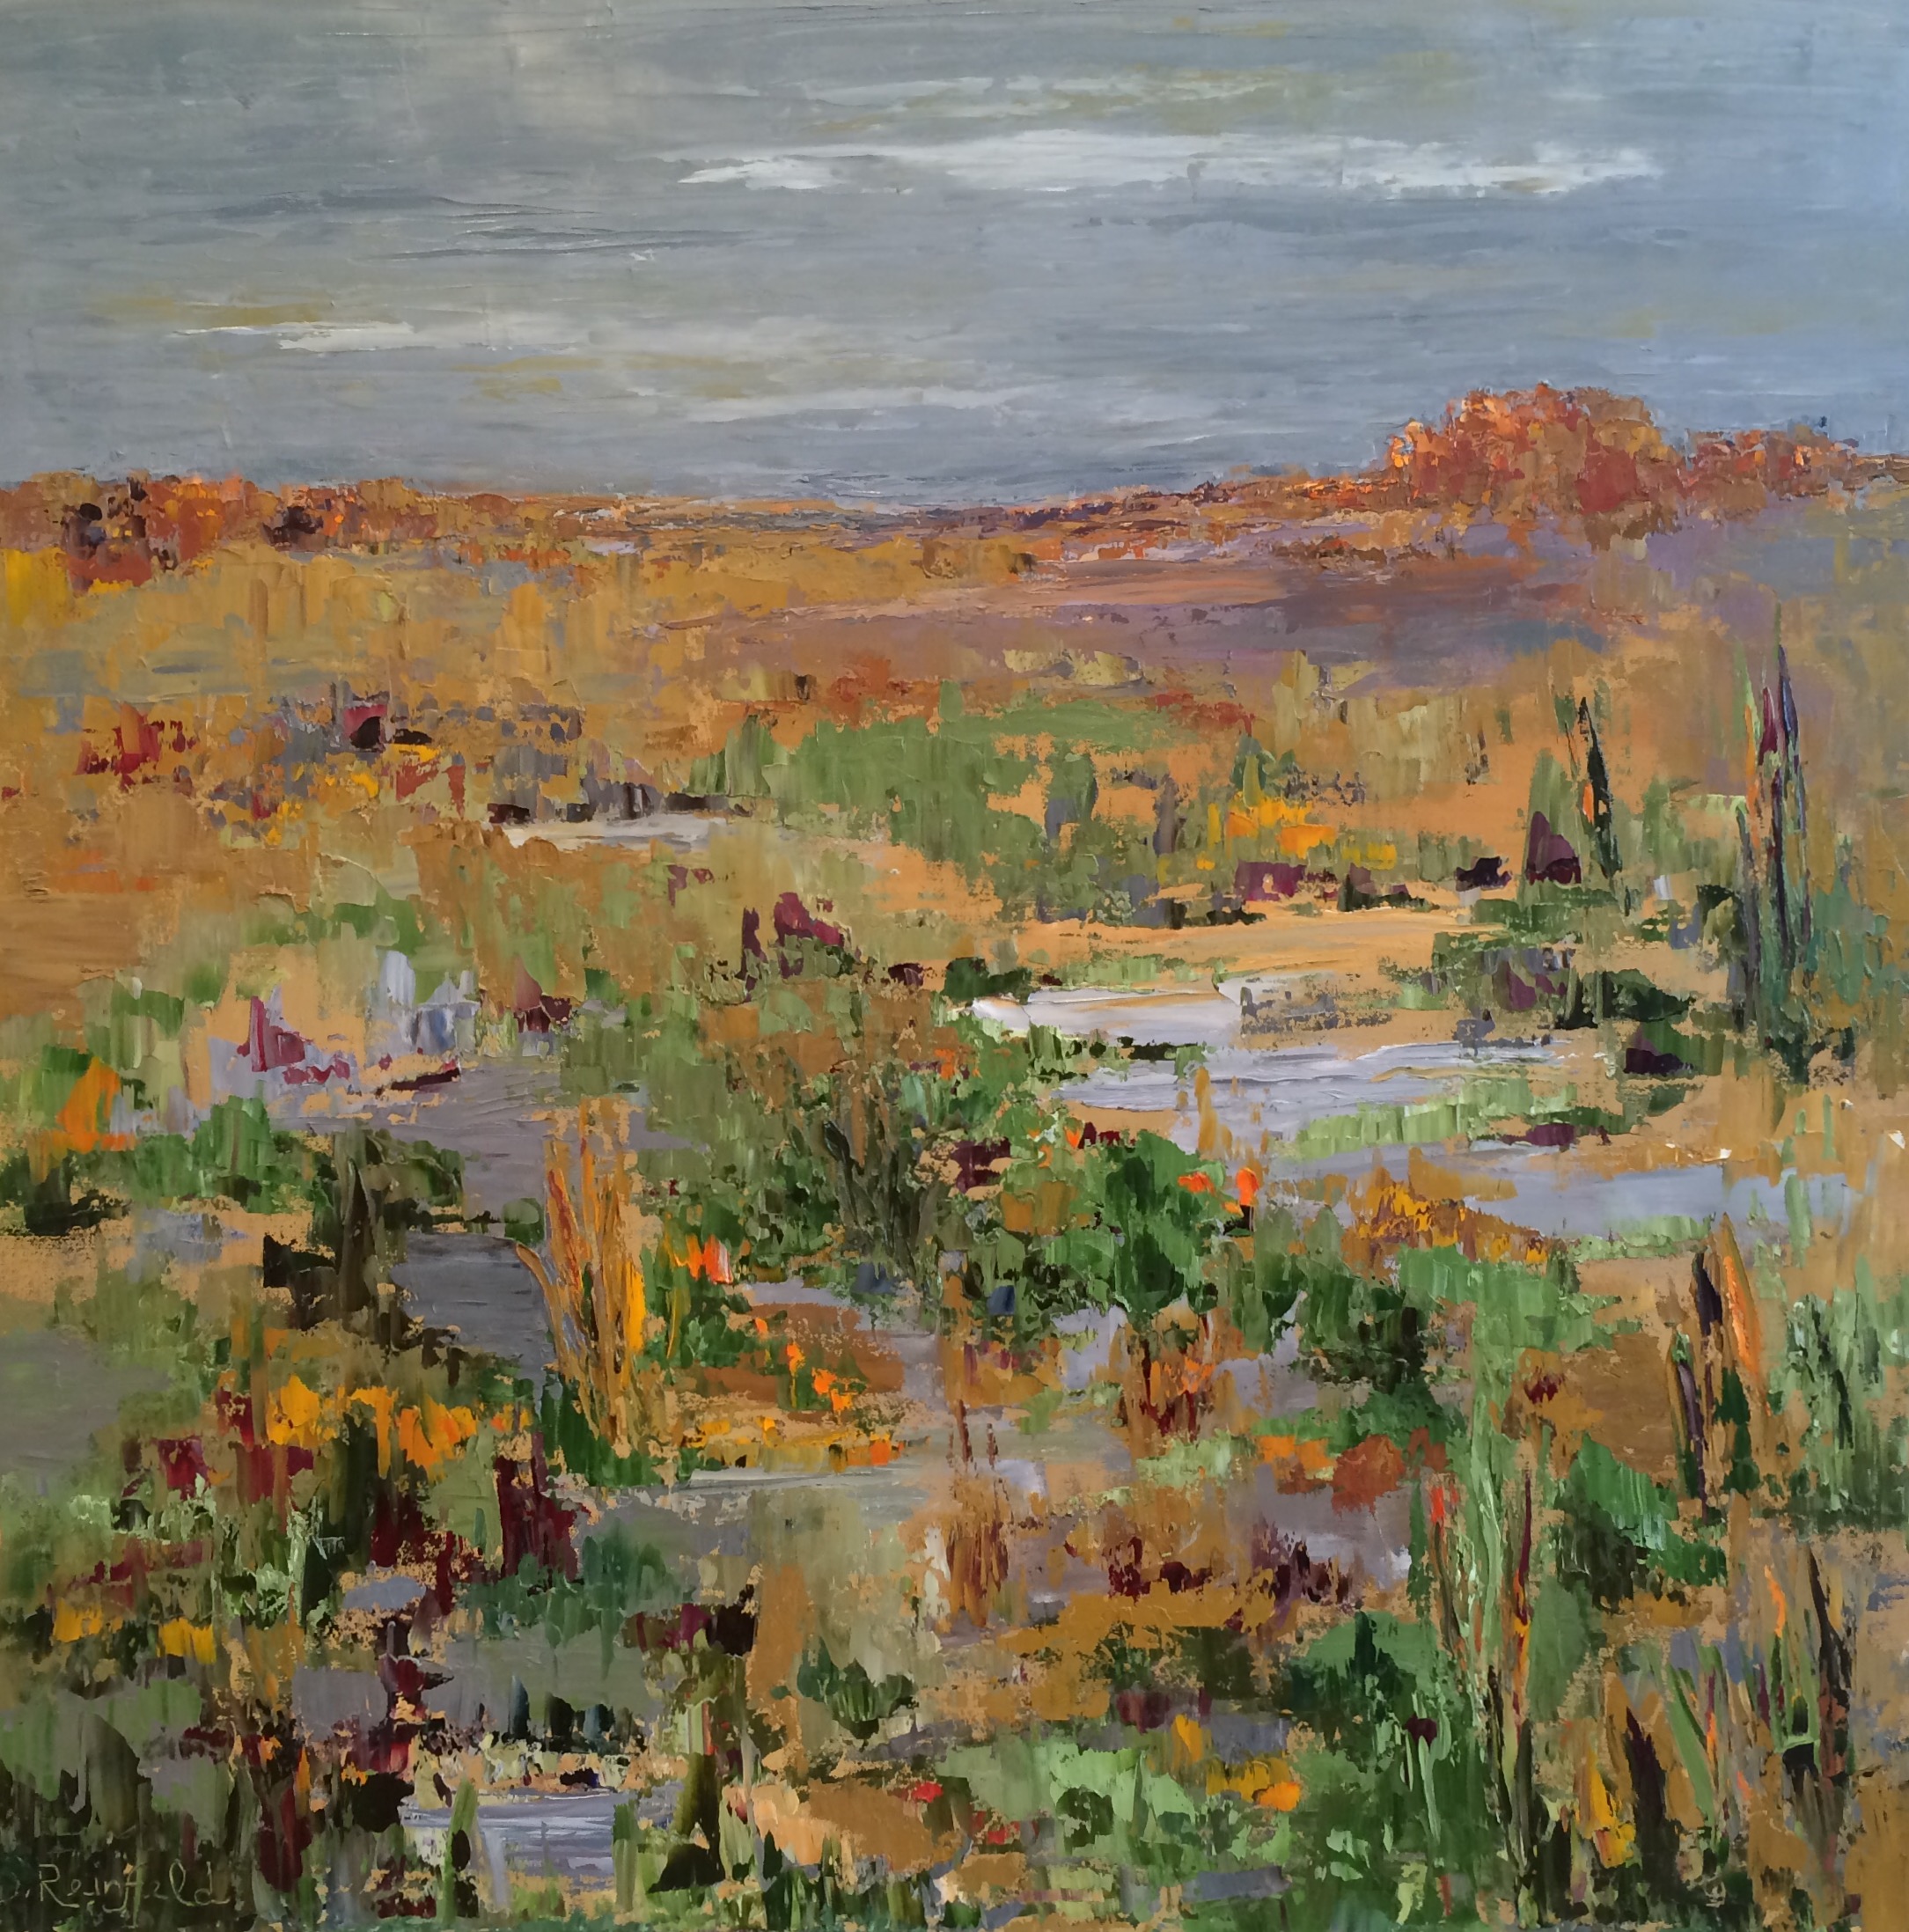 When the Desert Blooms, oil on canvas, 36"x36" SOLD